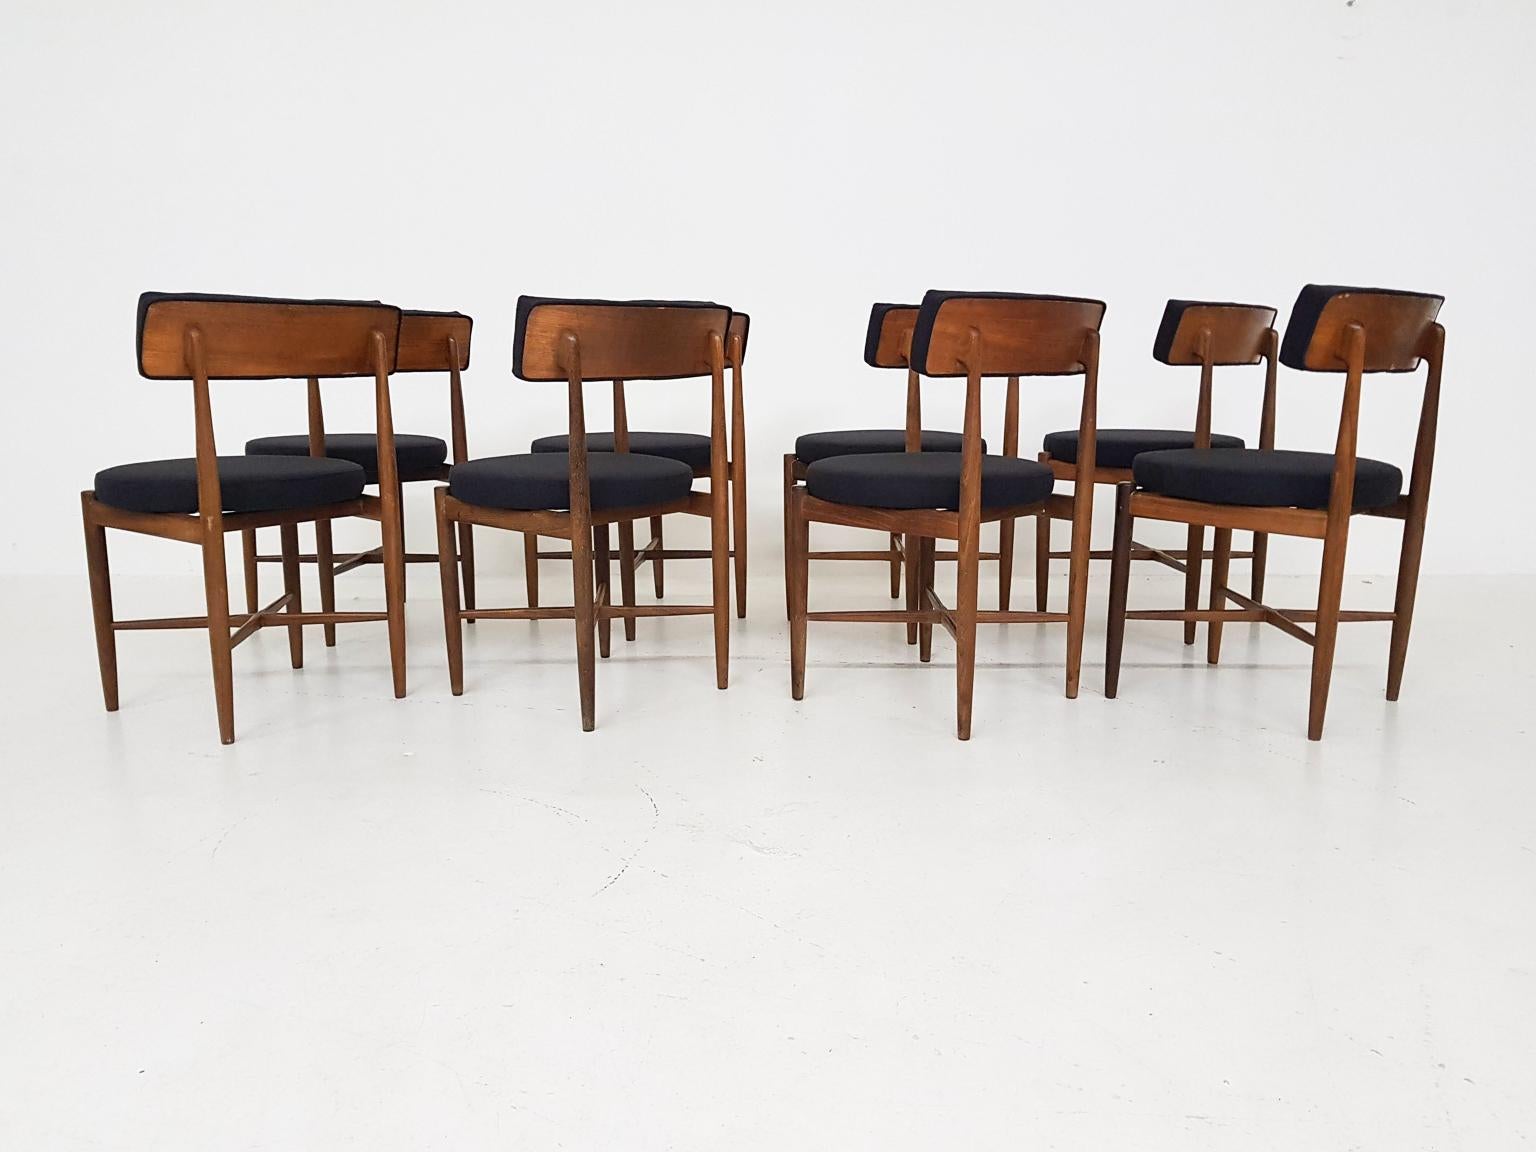 20th Century Set of 8 Victor Wilkins Teak Dining Chairs for G-plan, United Kingdom, 1960s